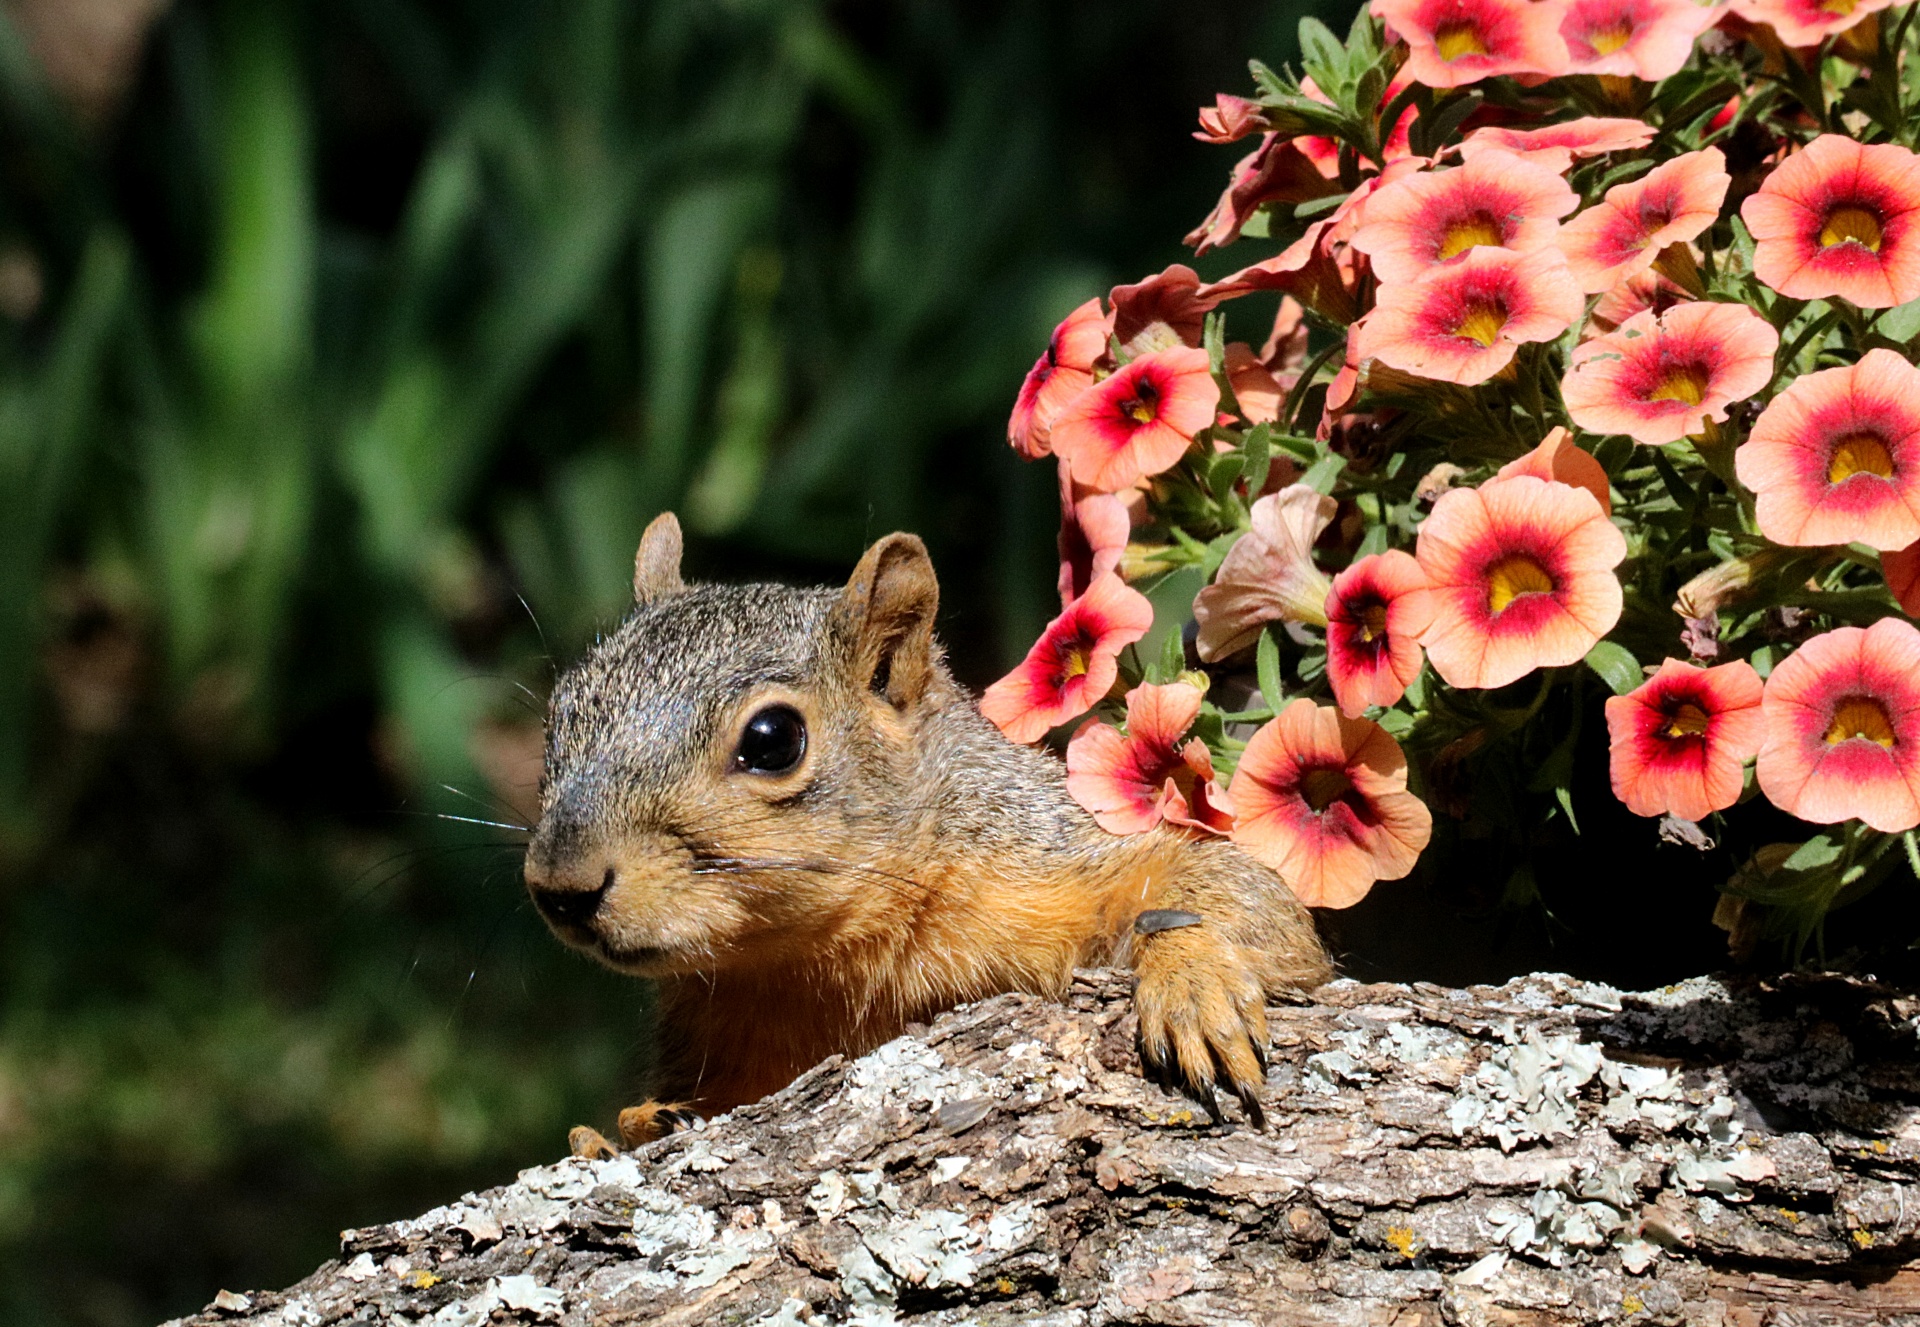 A cute little fox squirrel, plays peek-a-boo with me from behind a tree limb and a basket of pink petunias.